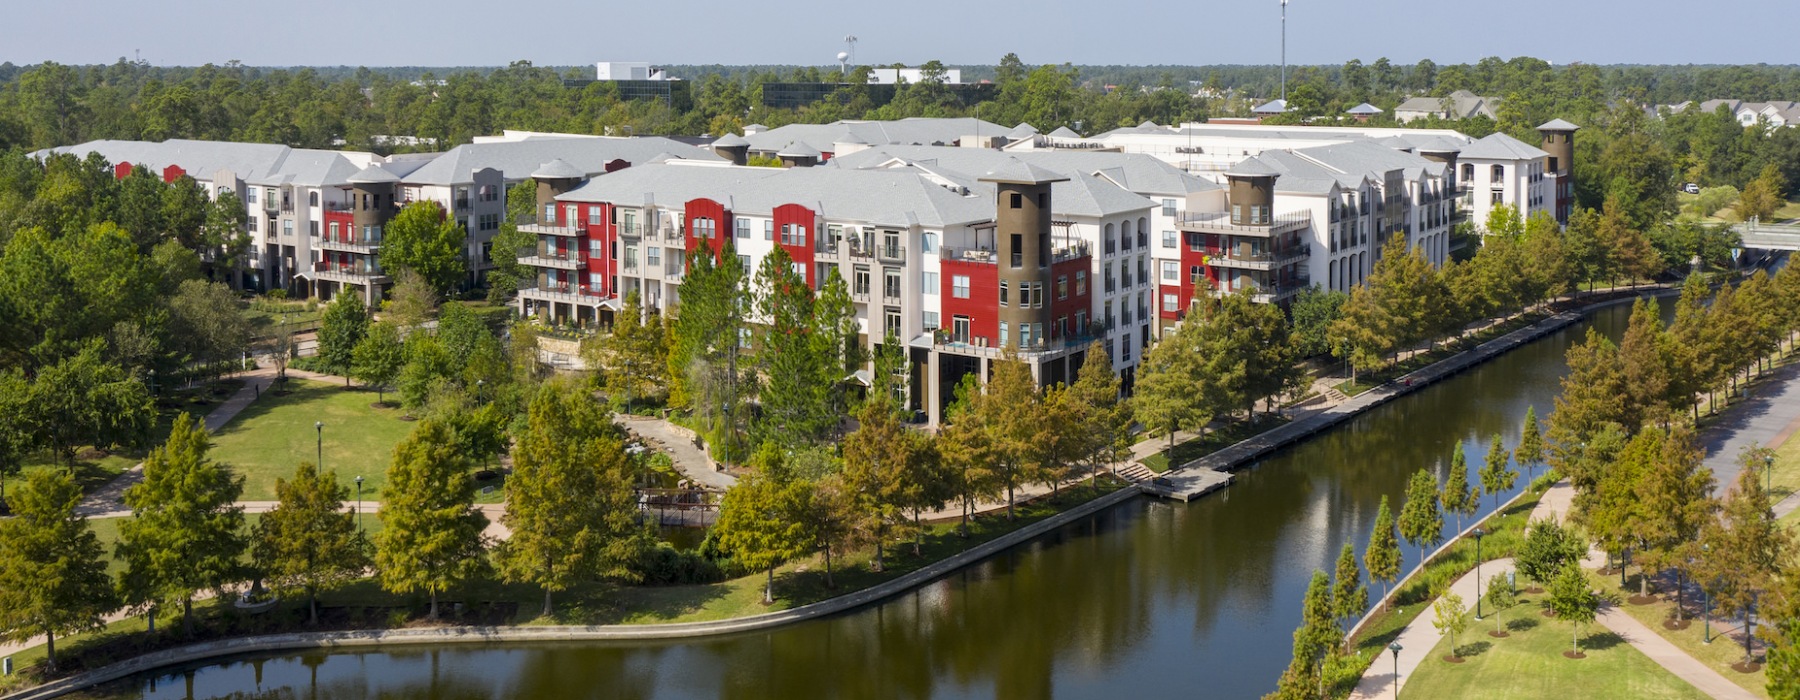 Boardwalk at Town Center Apartments in The Woodlands, Texas